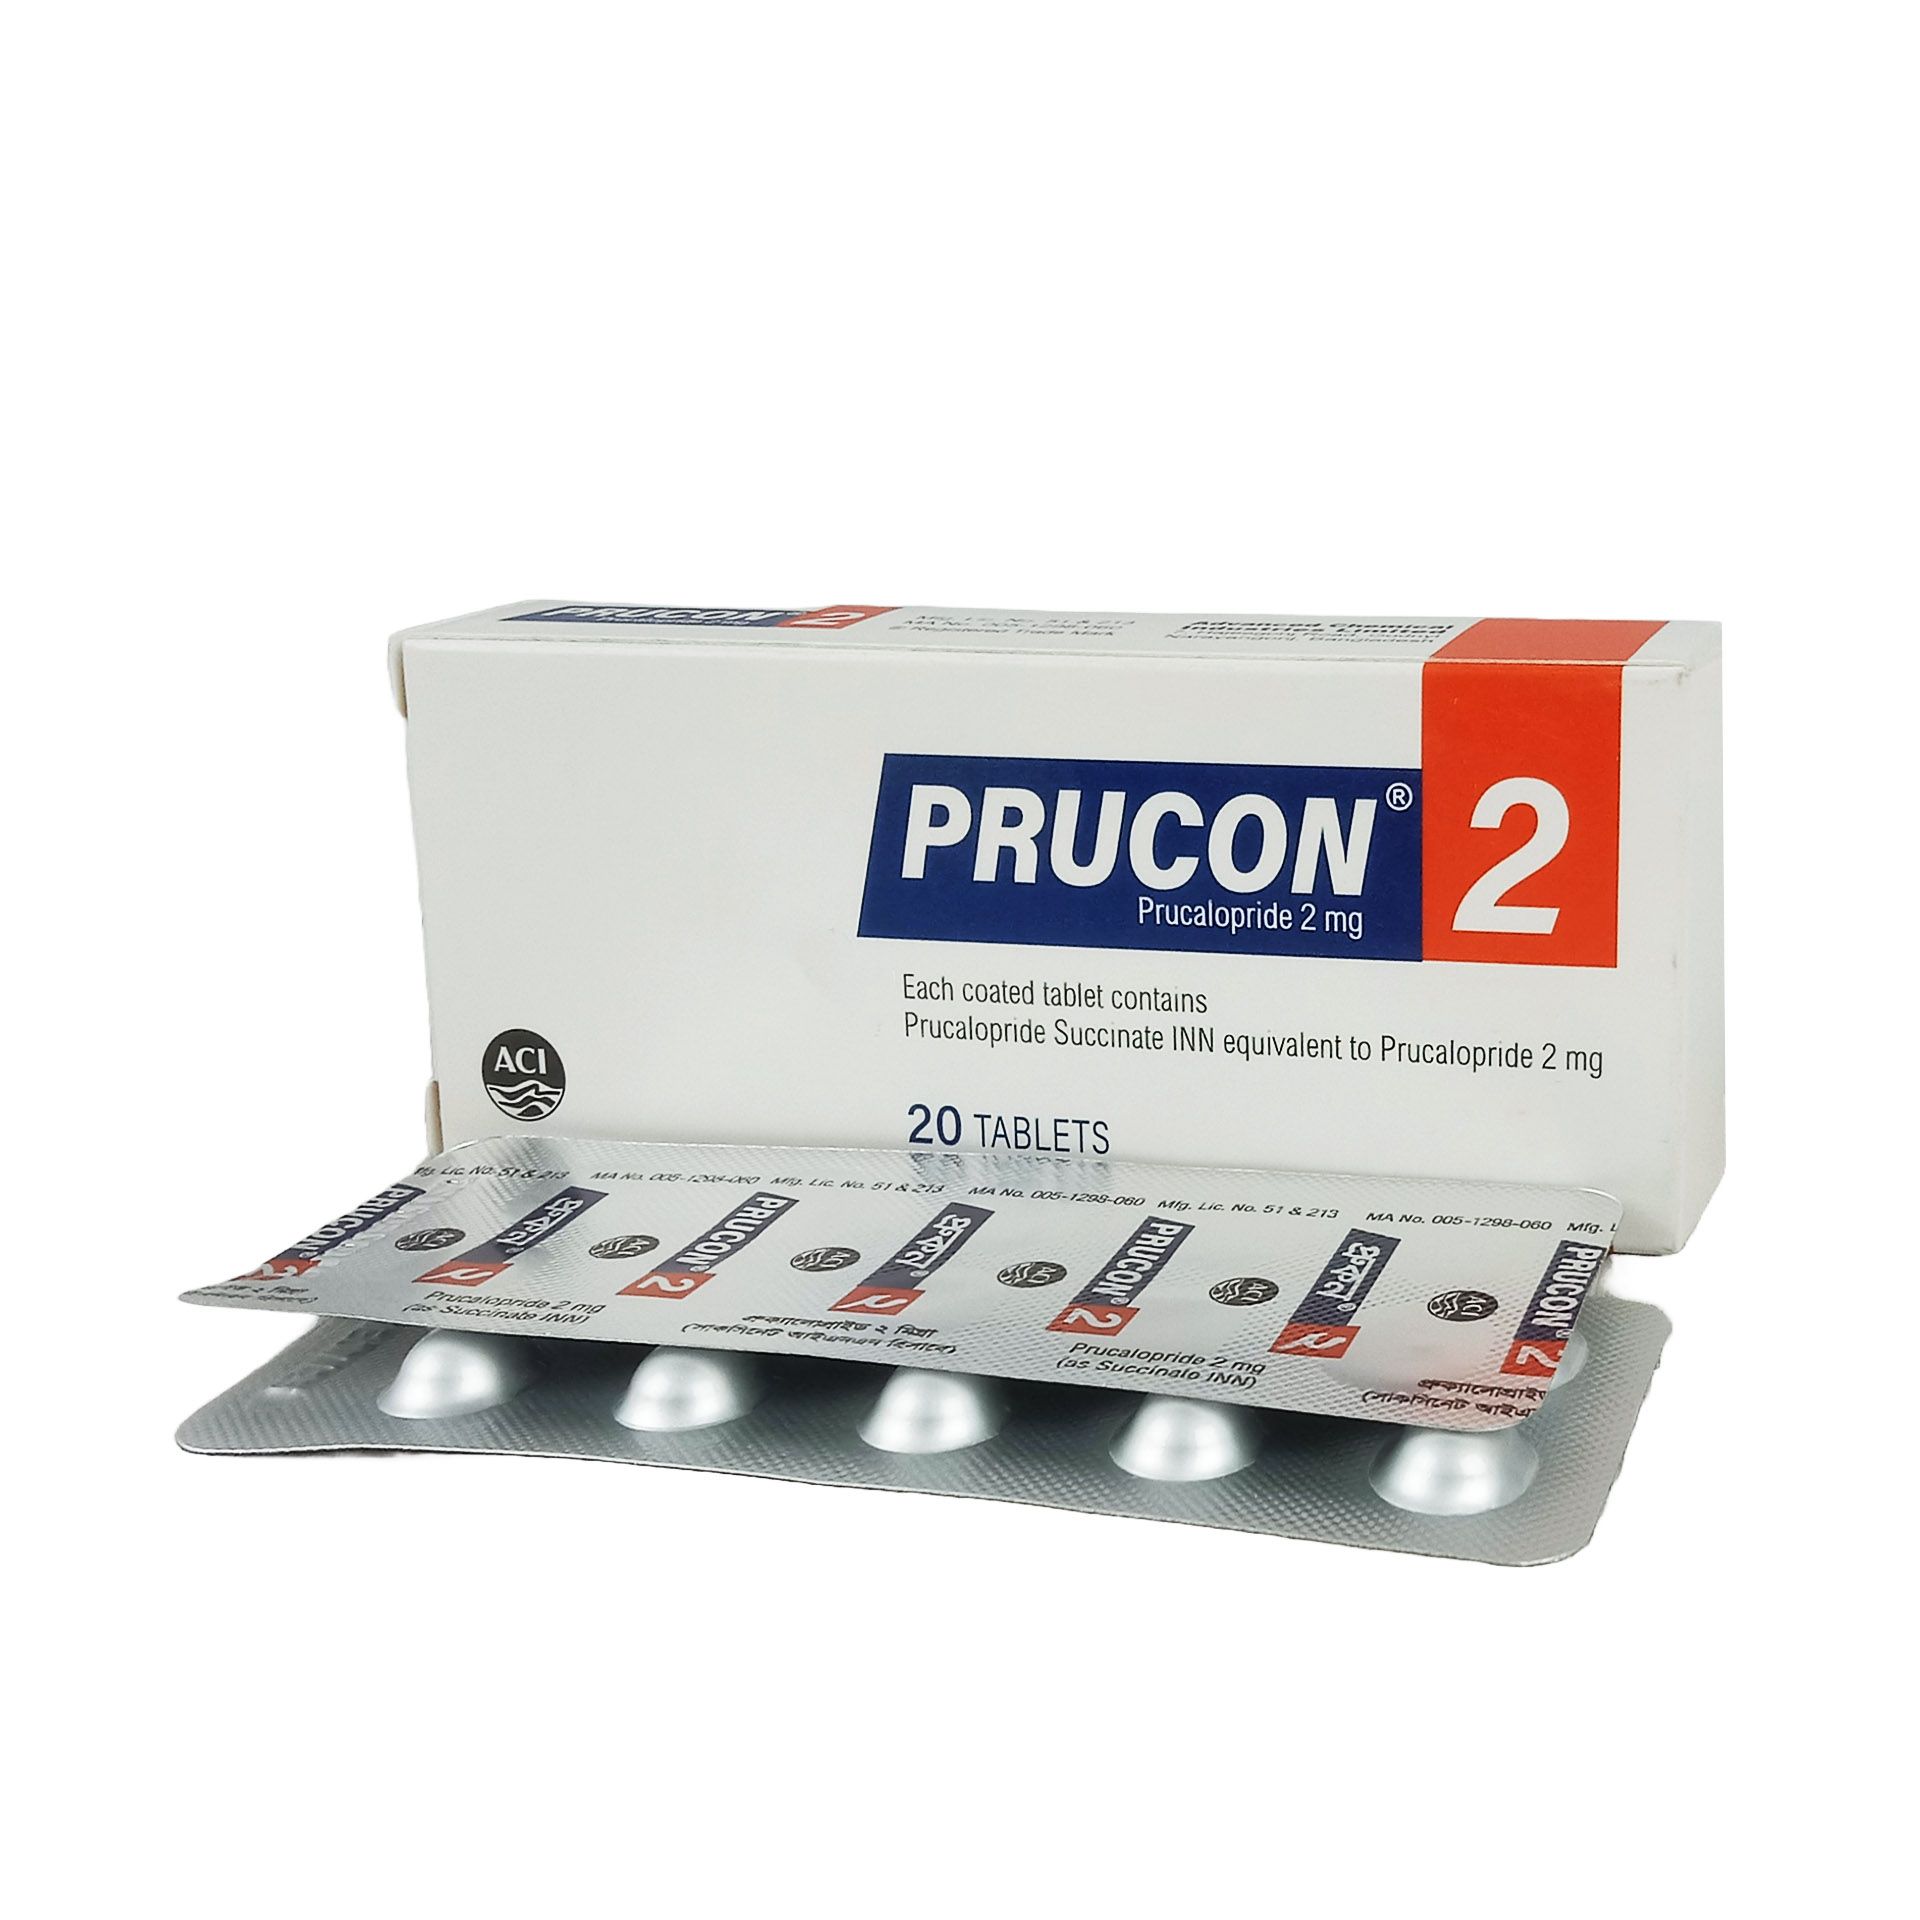 Prucon 2mg Tablet